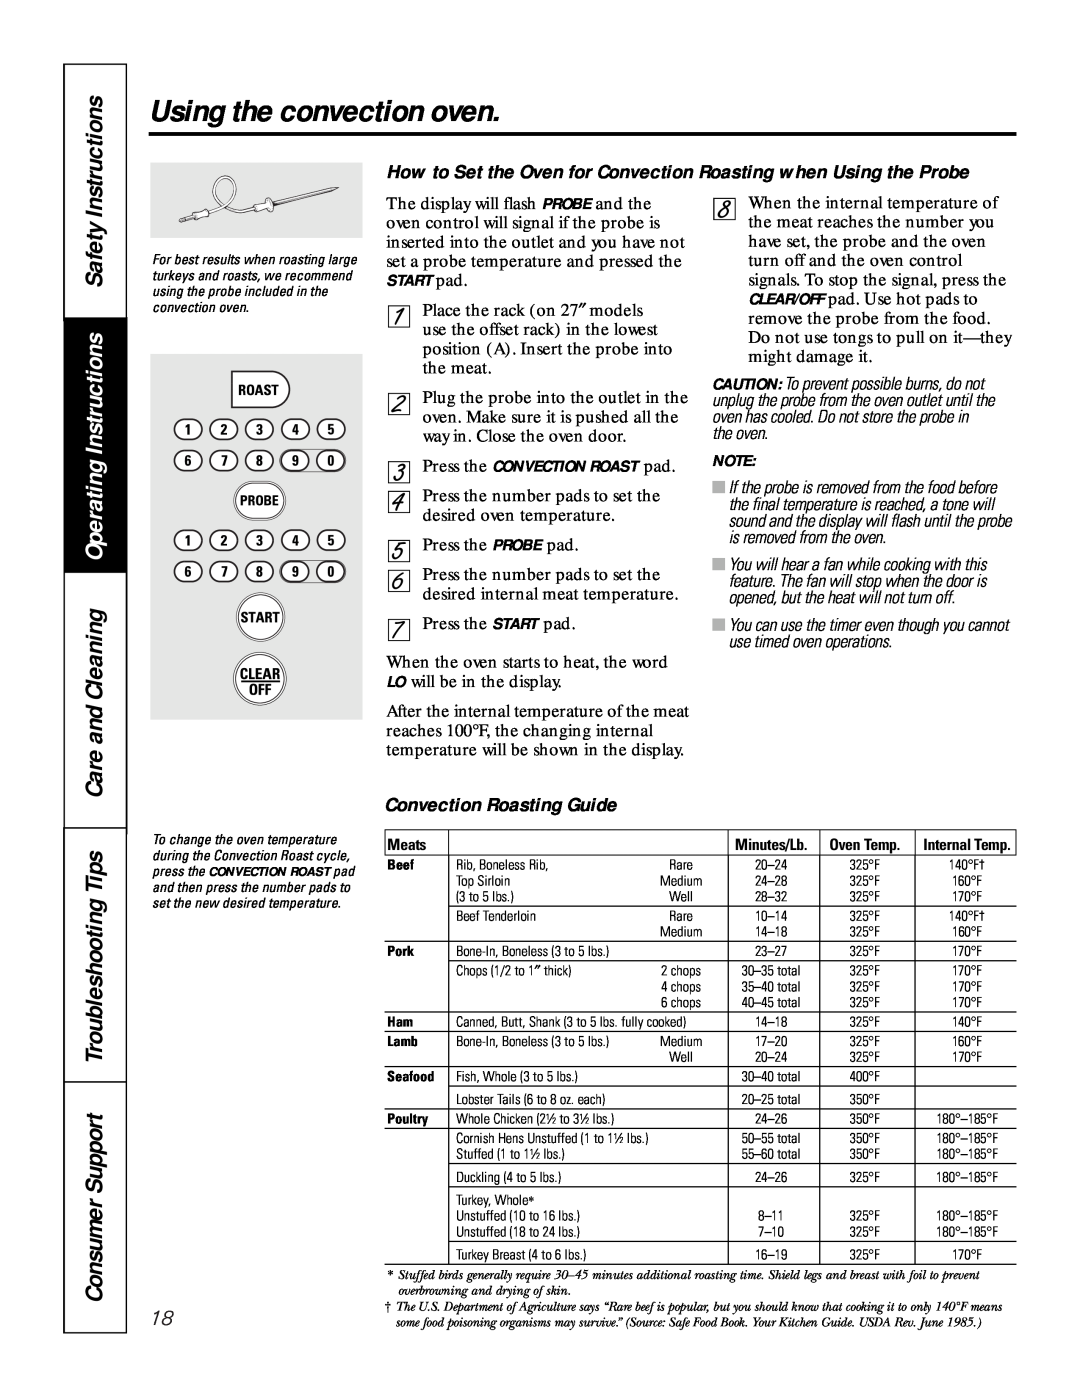 GE JCK 915, JCT 915 Care and Cleaning Operating Instructions Safety, Convection Roasting Guide, Using the convection oven 